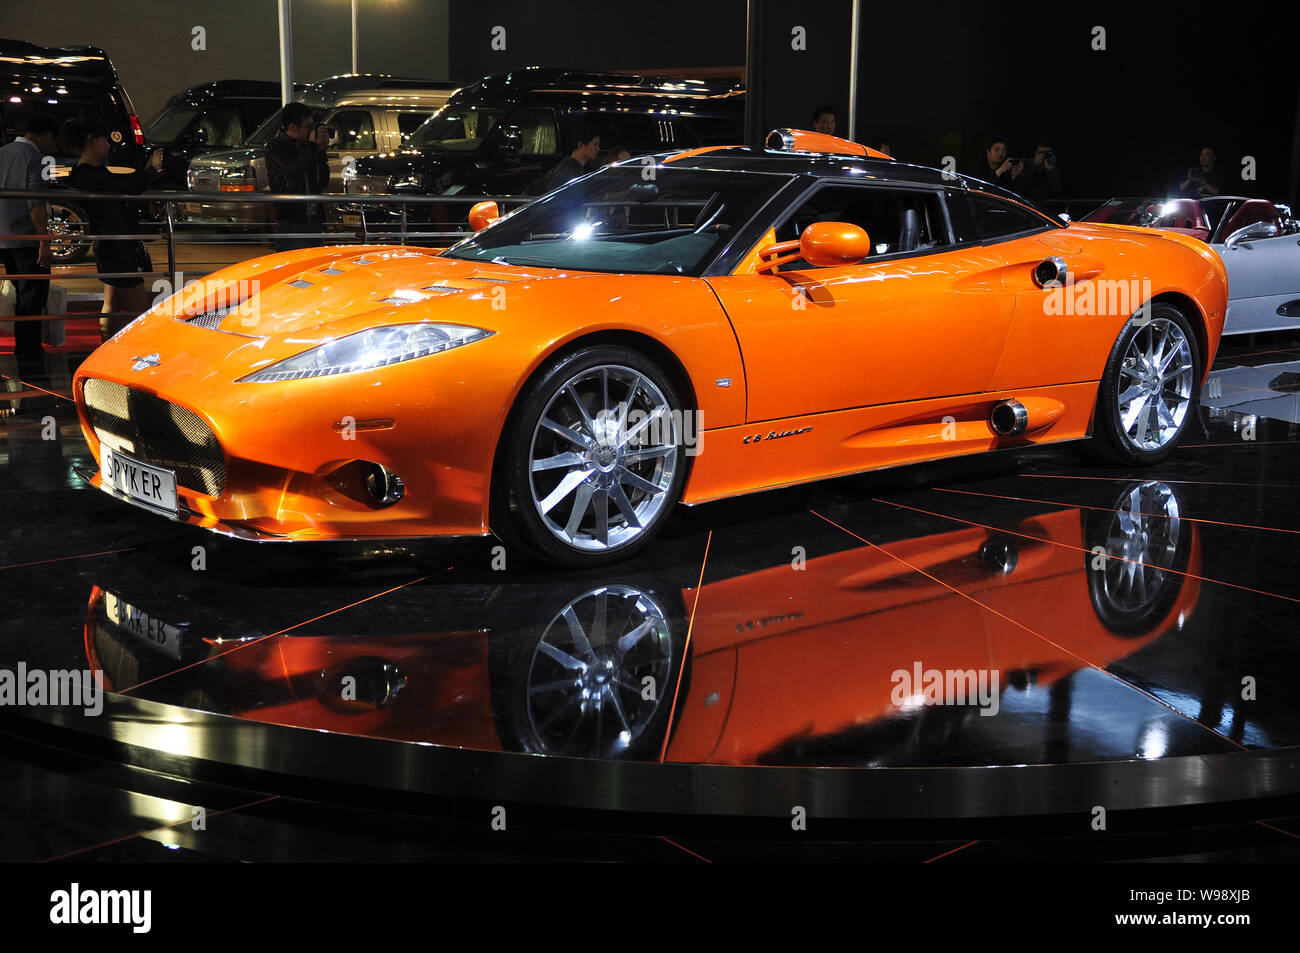 The Spyker C8 Aileron is seen on display at the 14th Shanghai International Automobile Industry Exhibition, known as Auto Shanghai 2011, at the Shangh Stock Photo